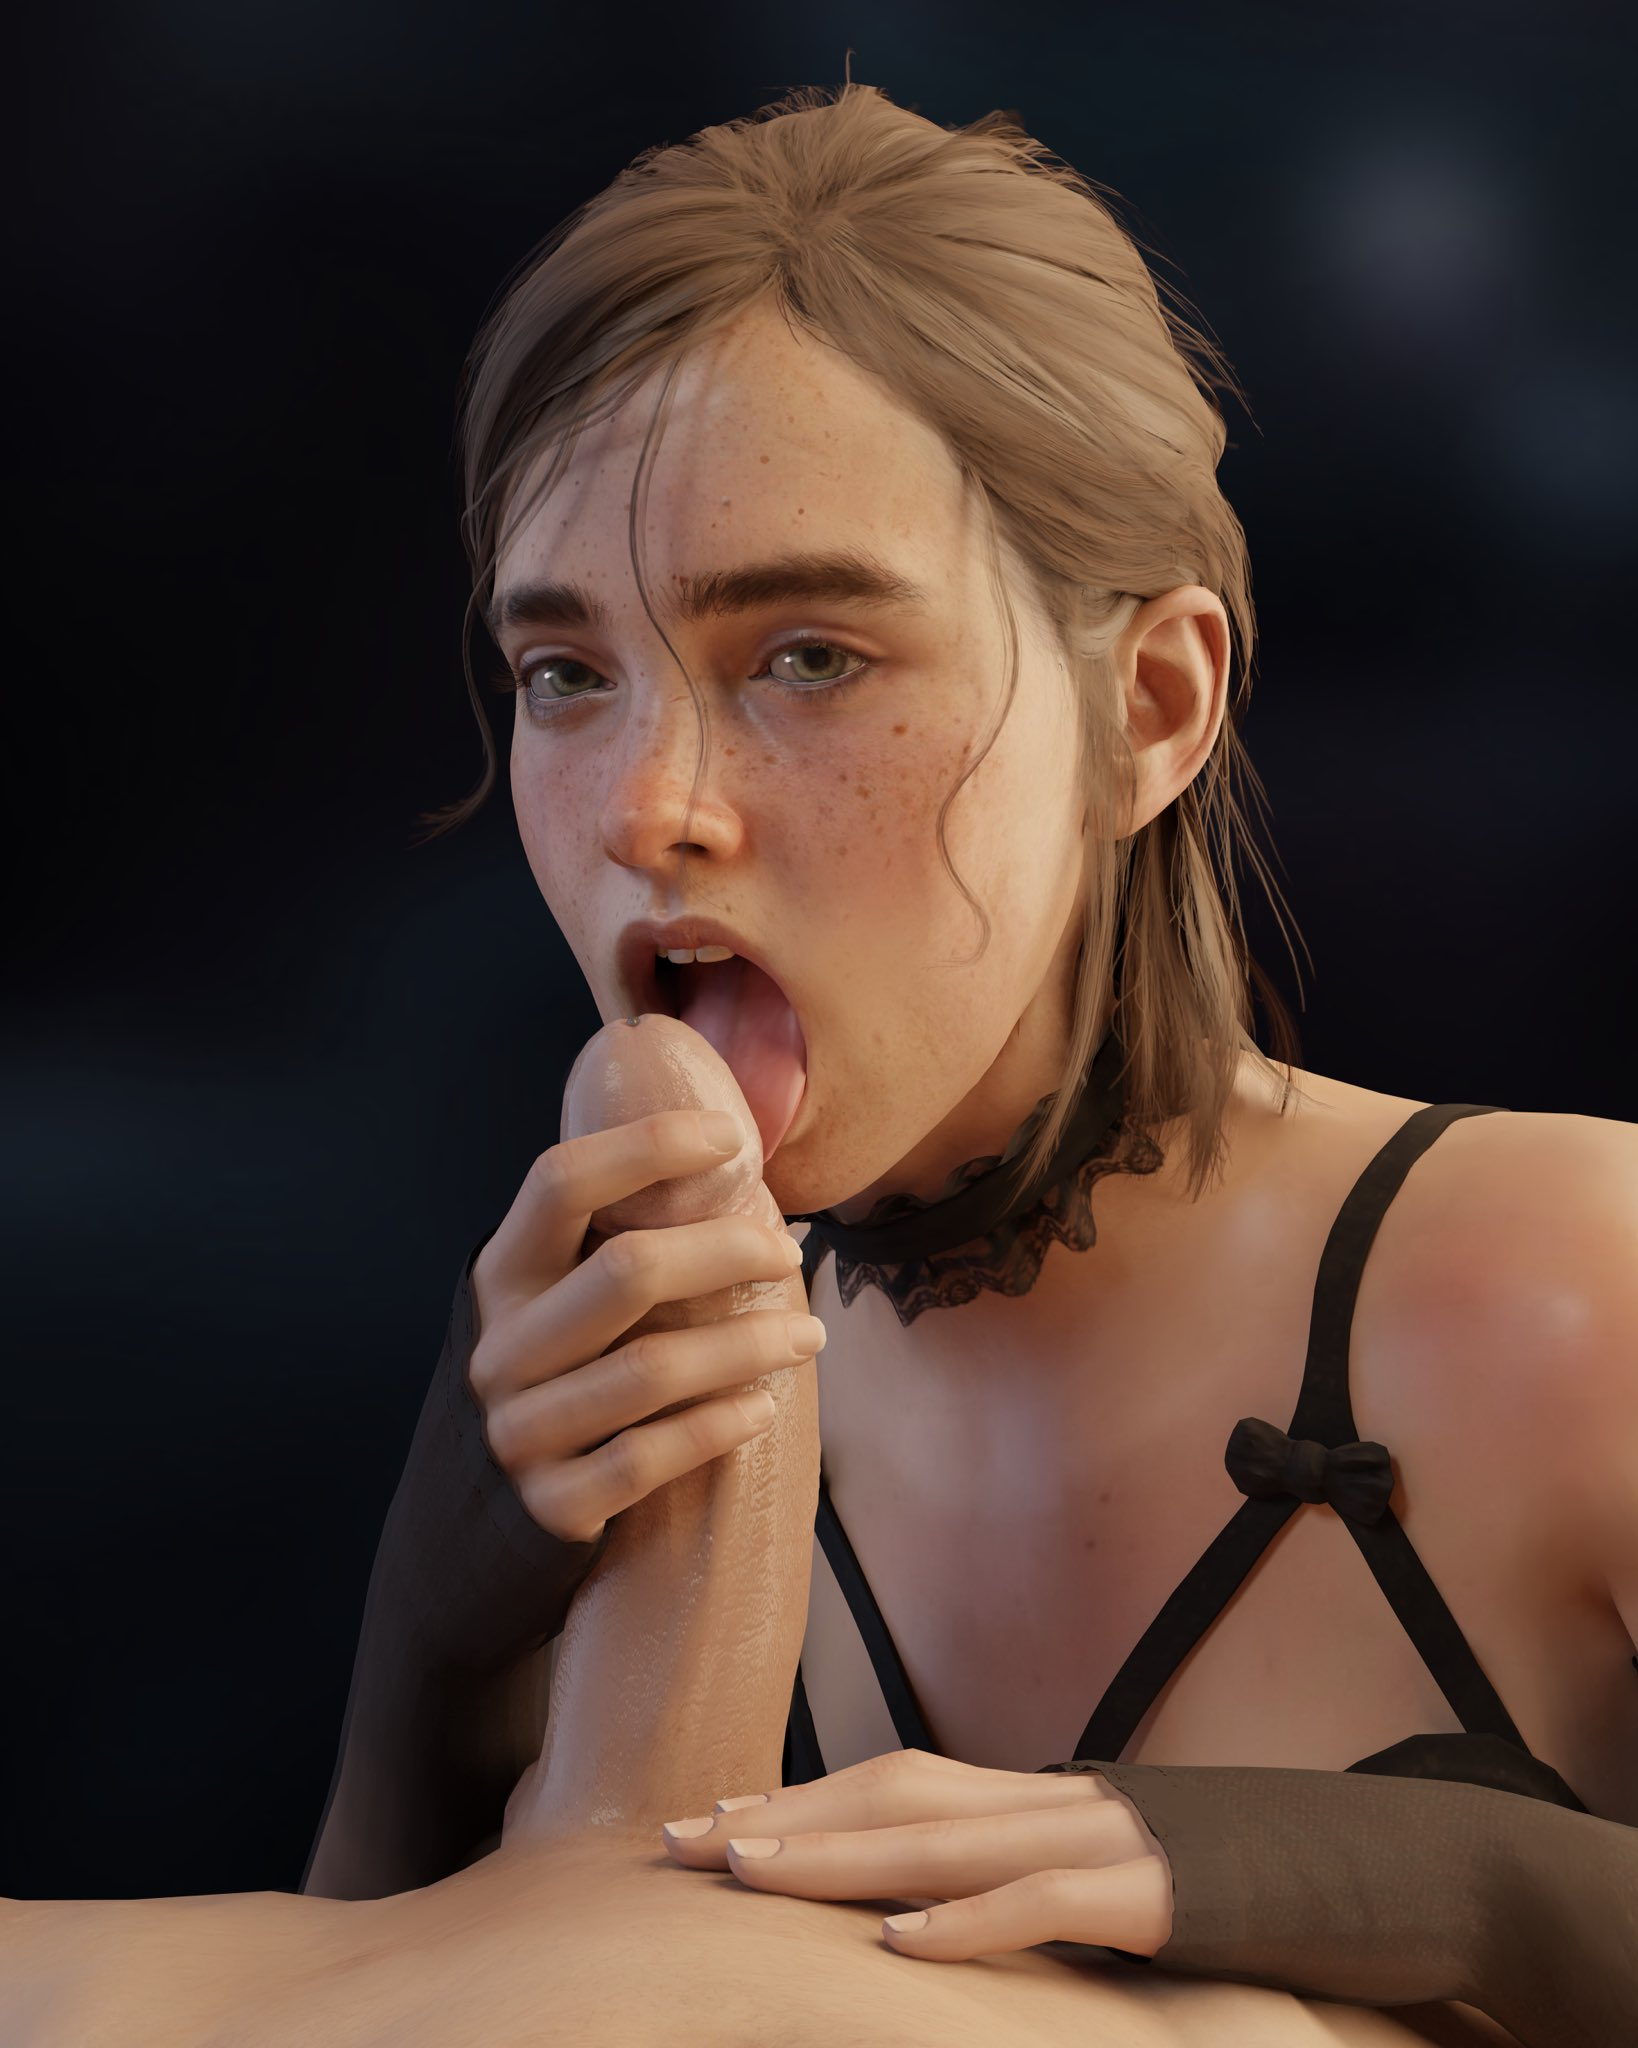 Ellie from the last of us rule 34